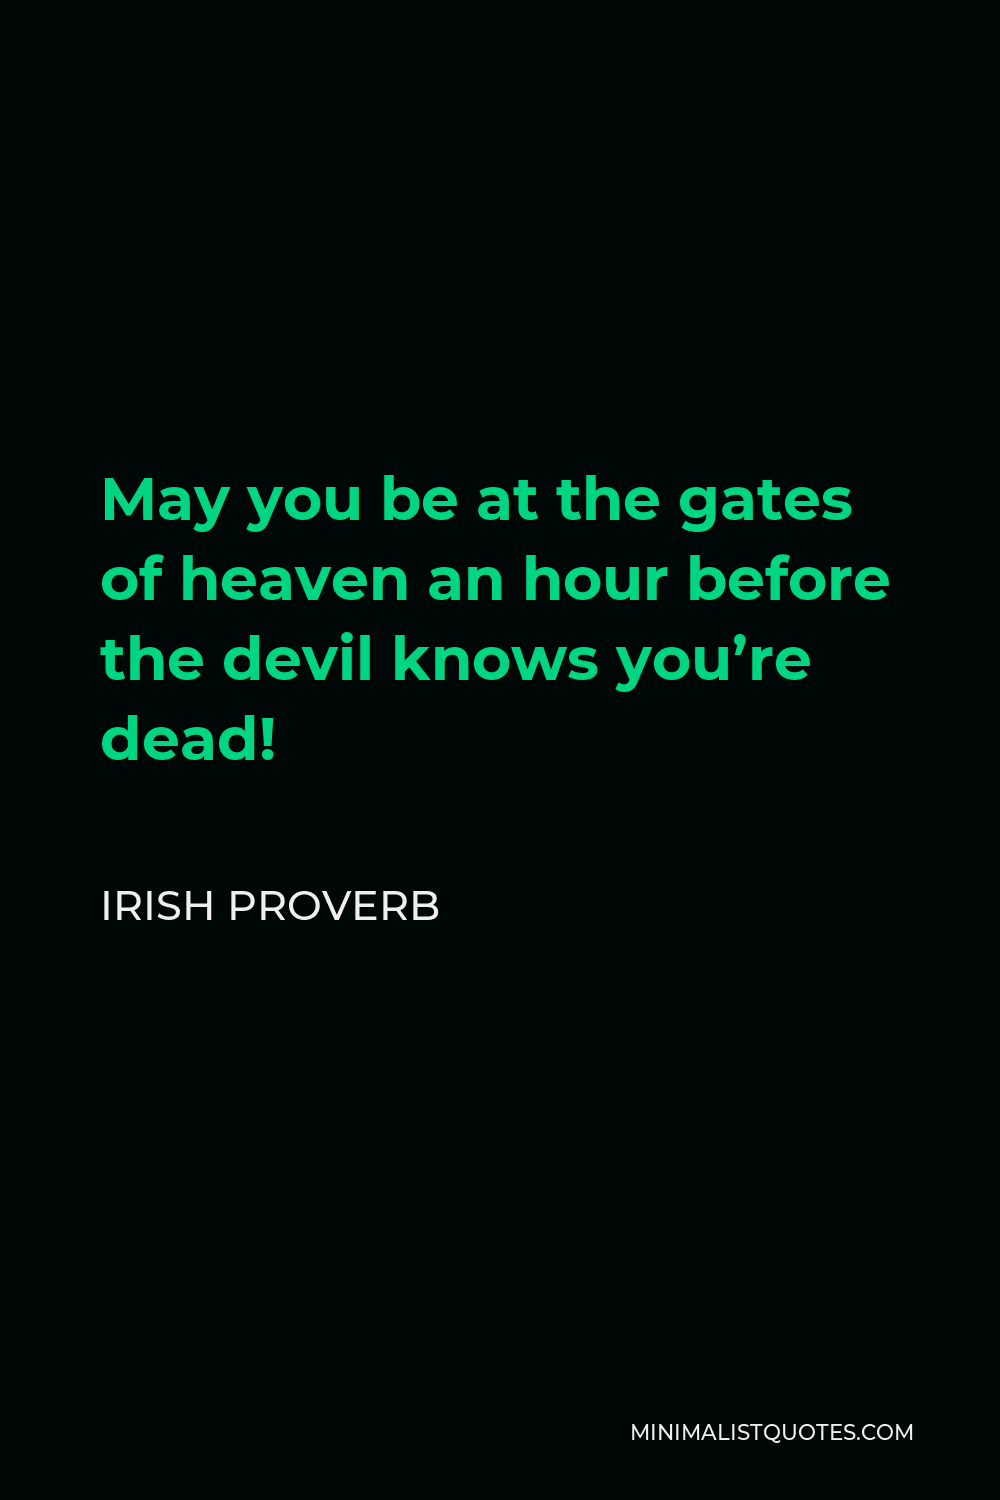 Irish Proverb Quote - May you be at the gates of heaven an hour before the devil knows you’re dead!